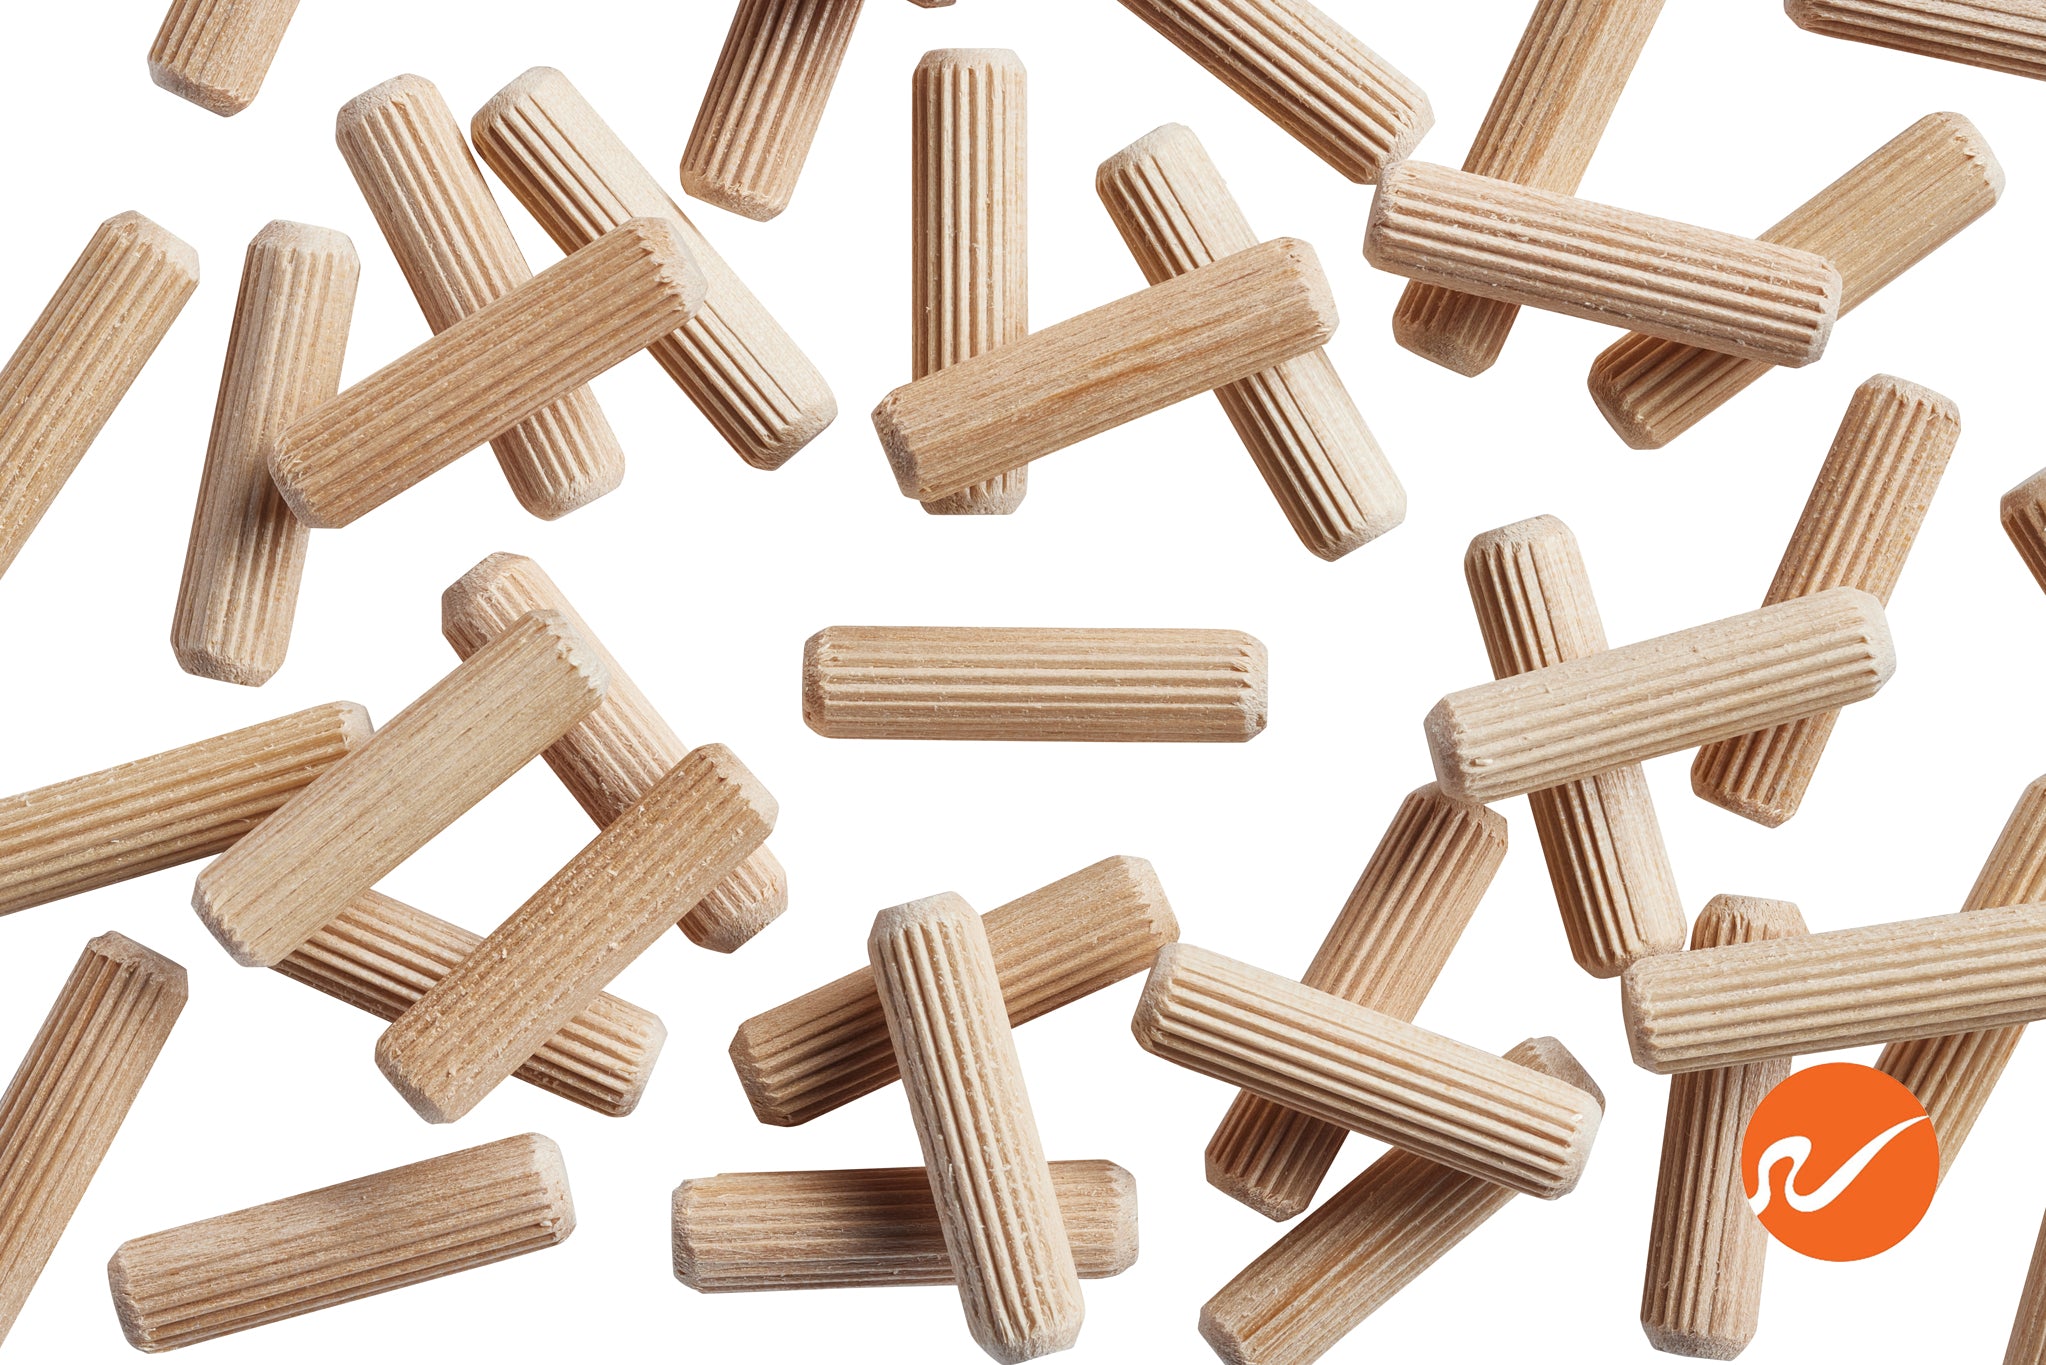 Albo Wooden Dowel Pins 1/4 x 1-1/4 inch Fluted Wood Dowels Rods 200 Pack Hardwood Crafts Dowel Pegs